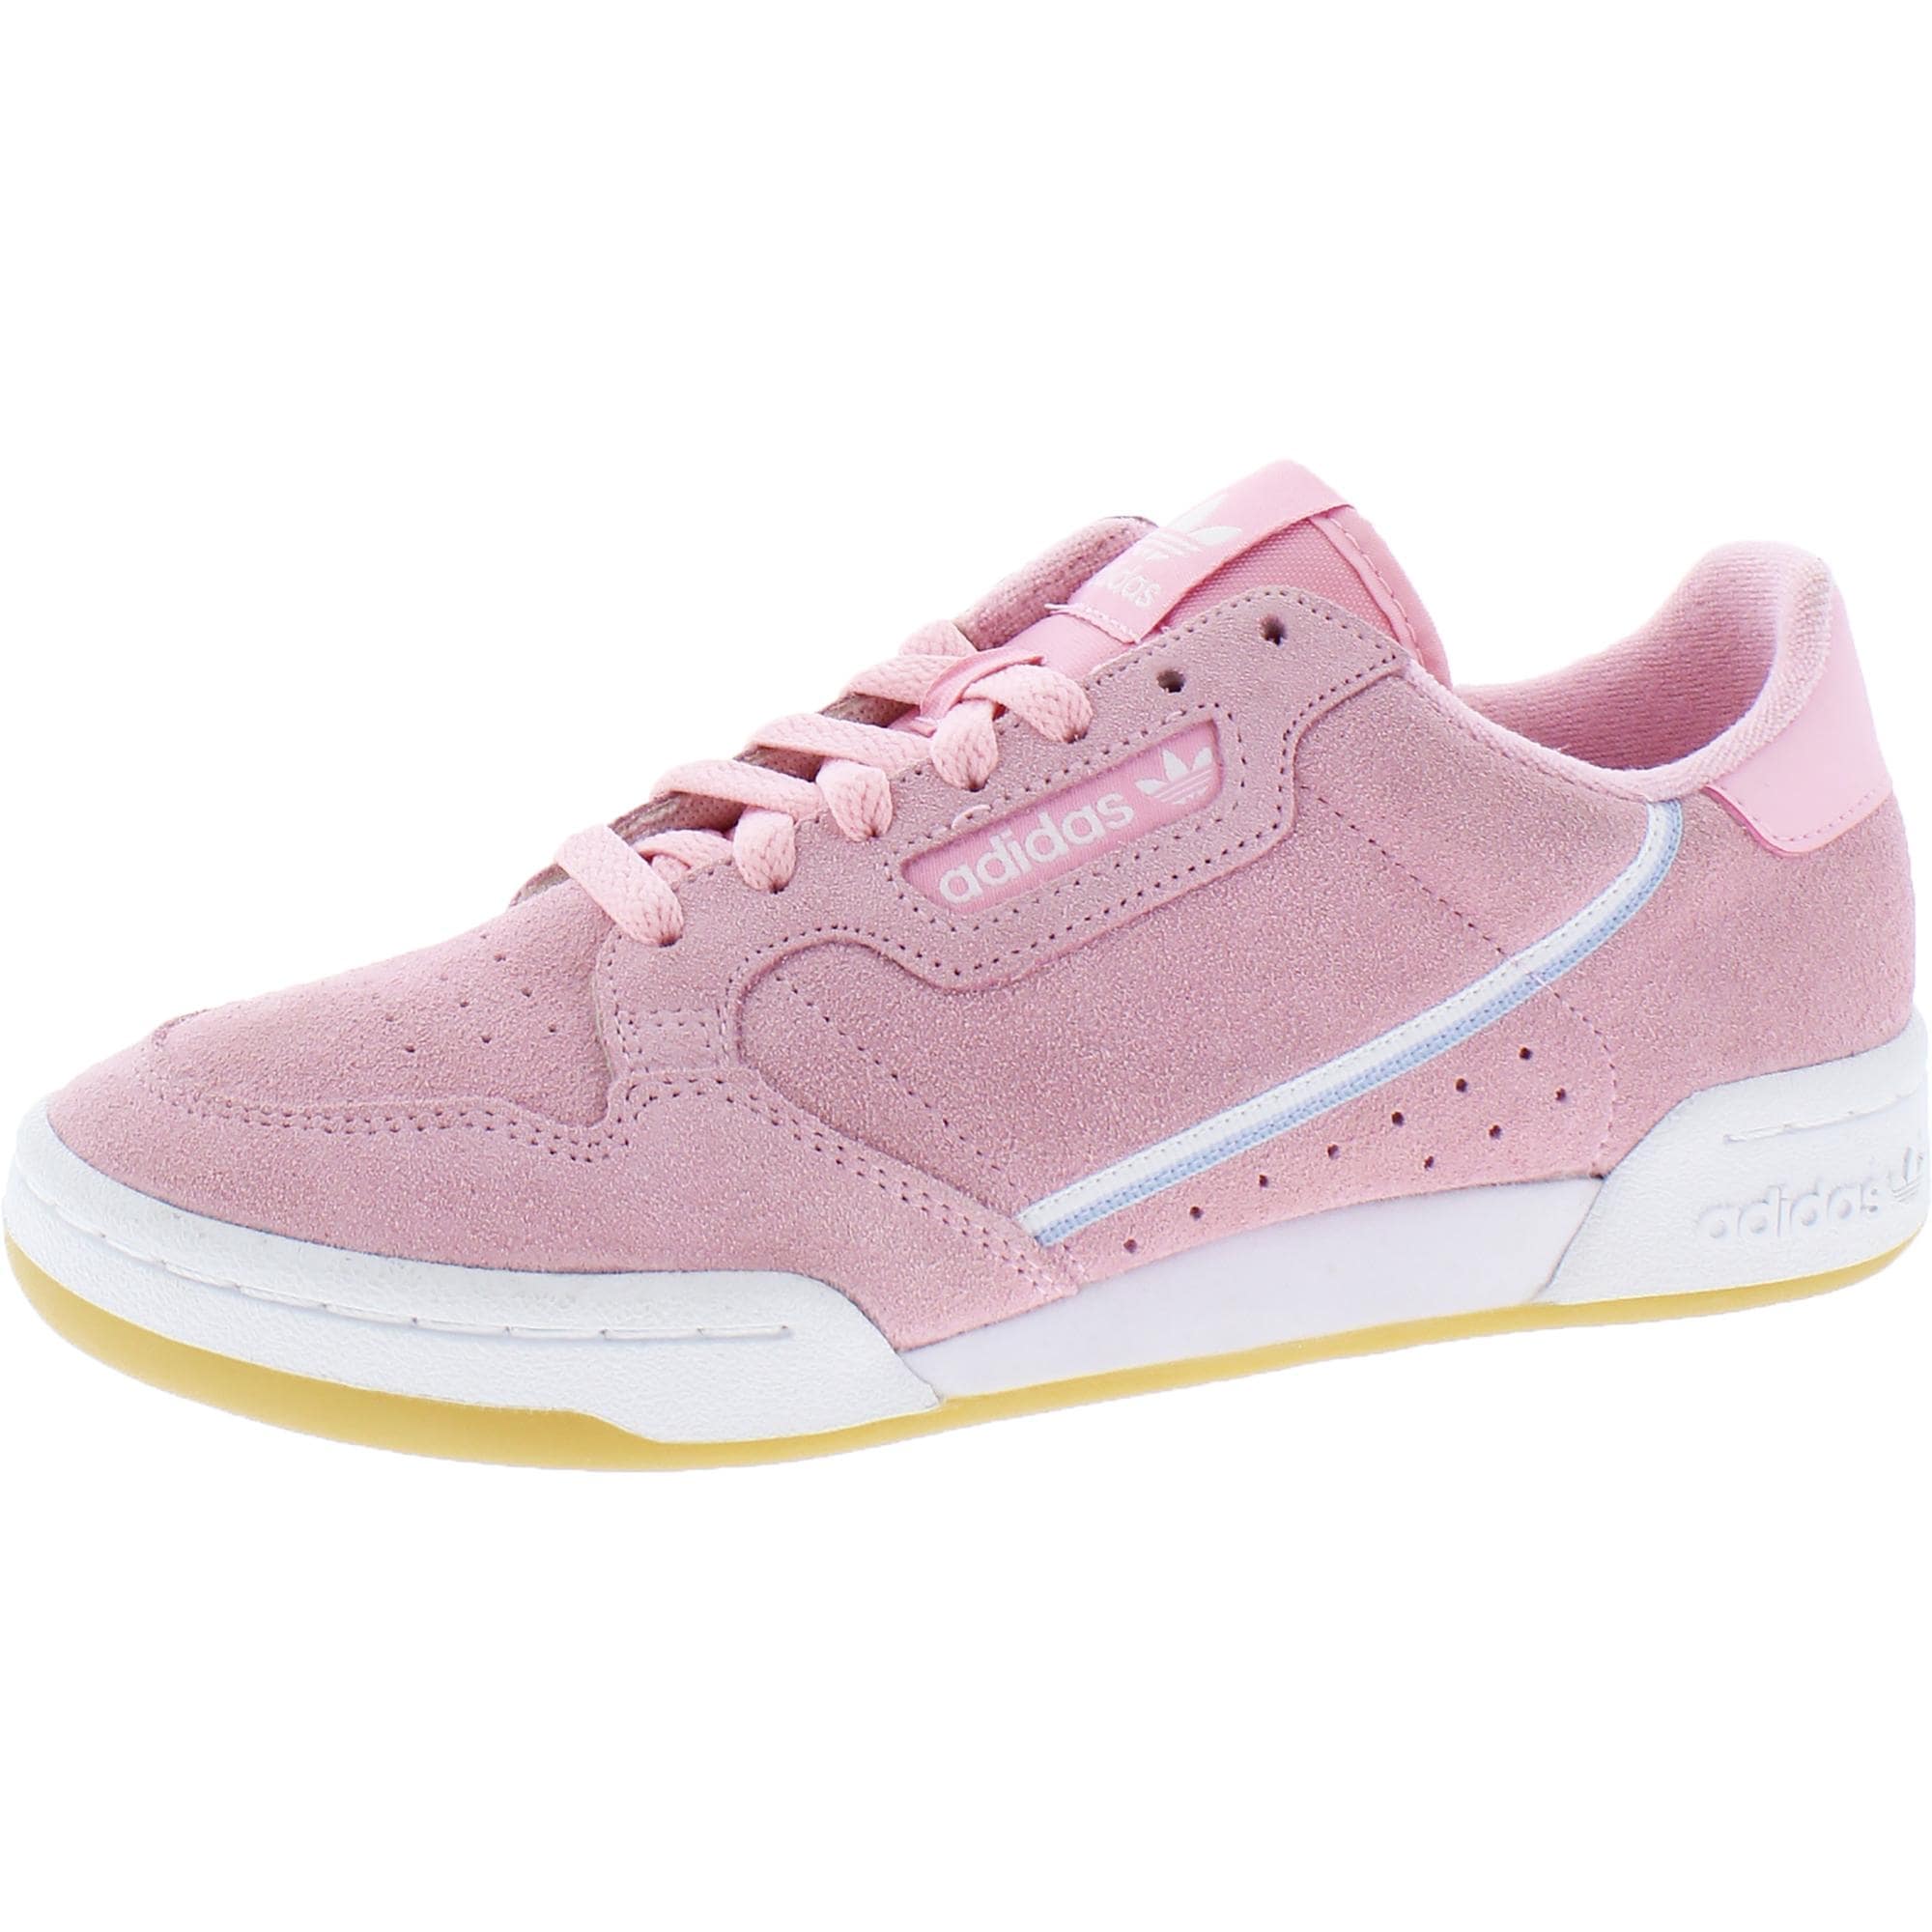 pink suede tennis shoes